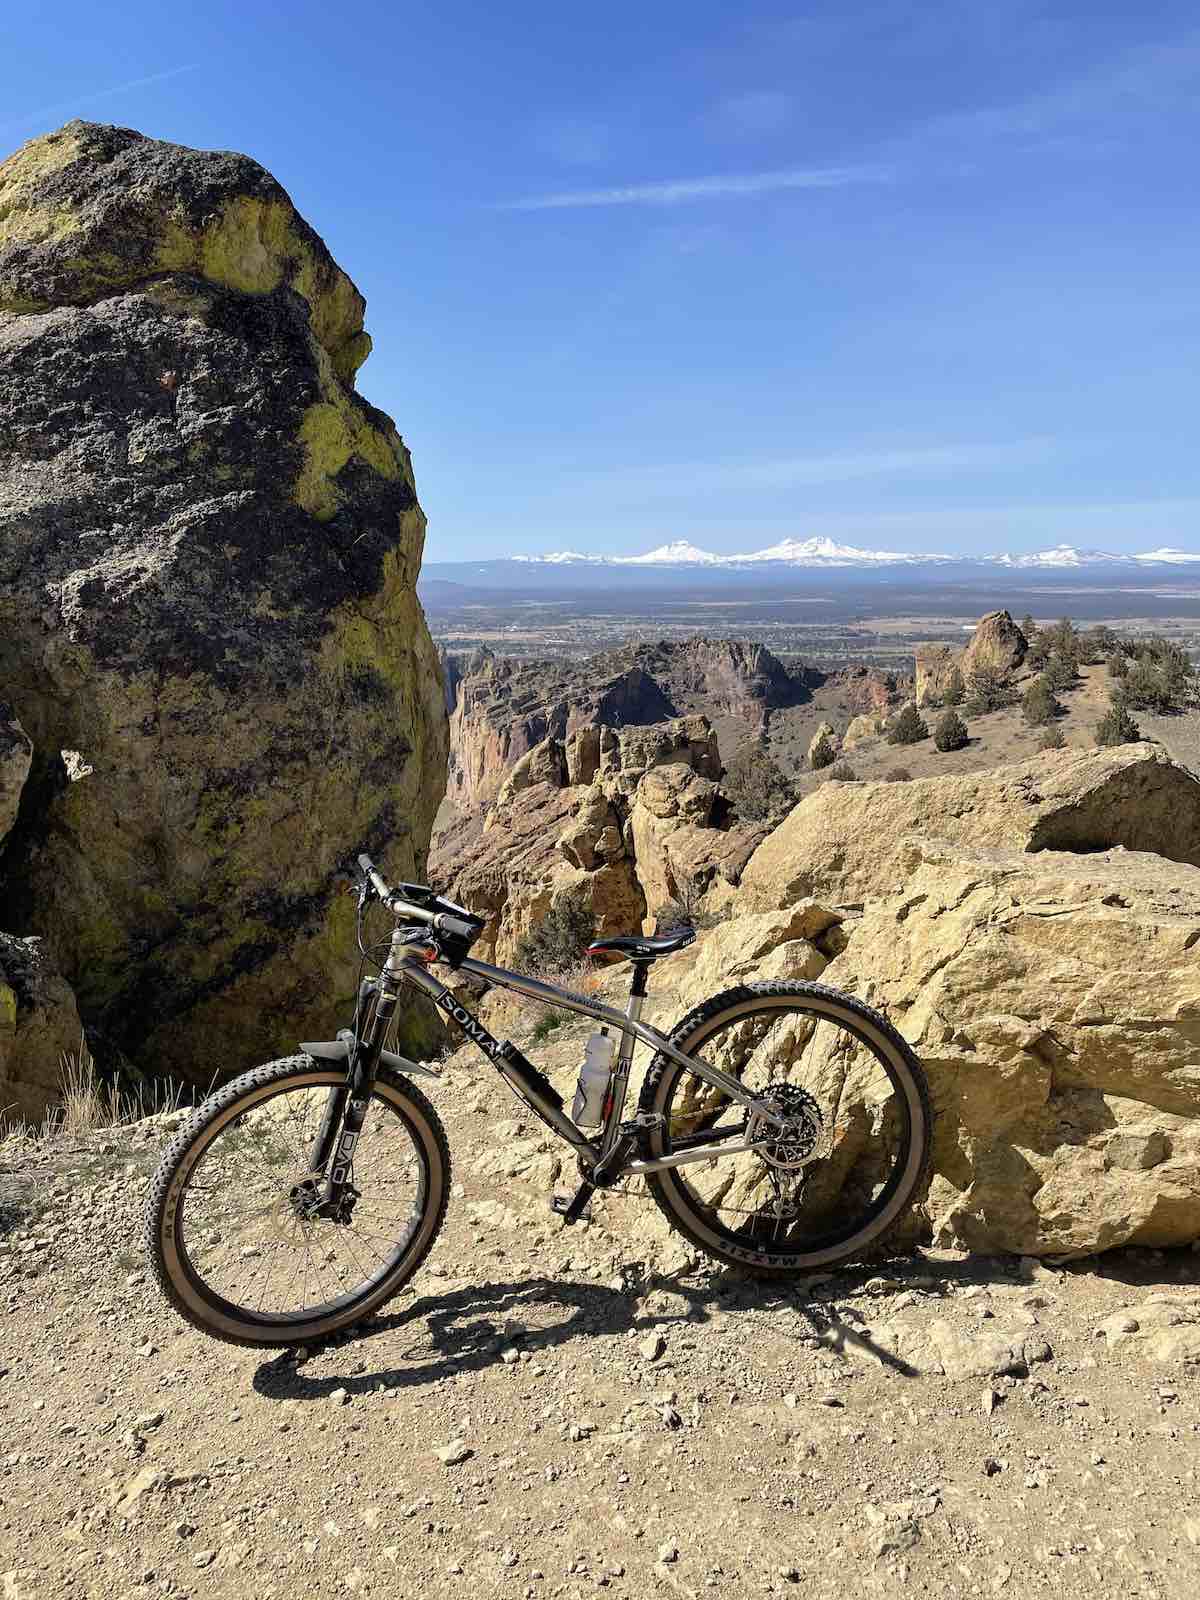 bikerumor pic of the day a mountain bike is posed near a large rock with another larger rock formation to the left of the photo snow capped mountains can be seen in the distance with clear blue skies.